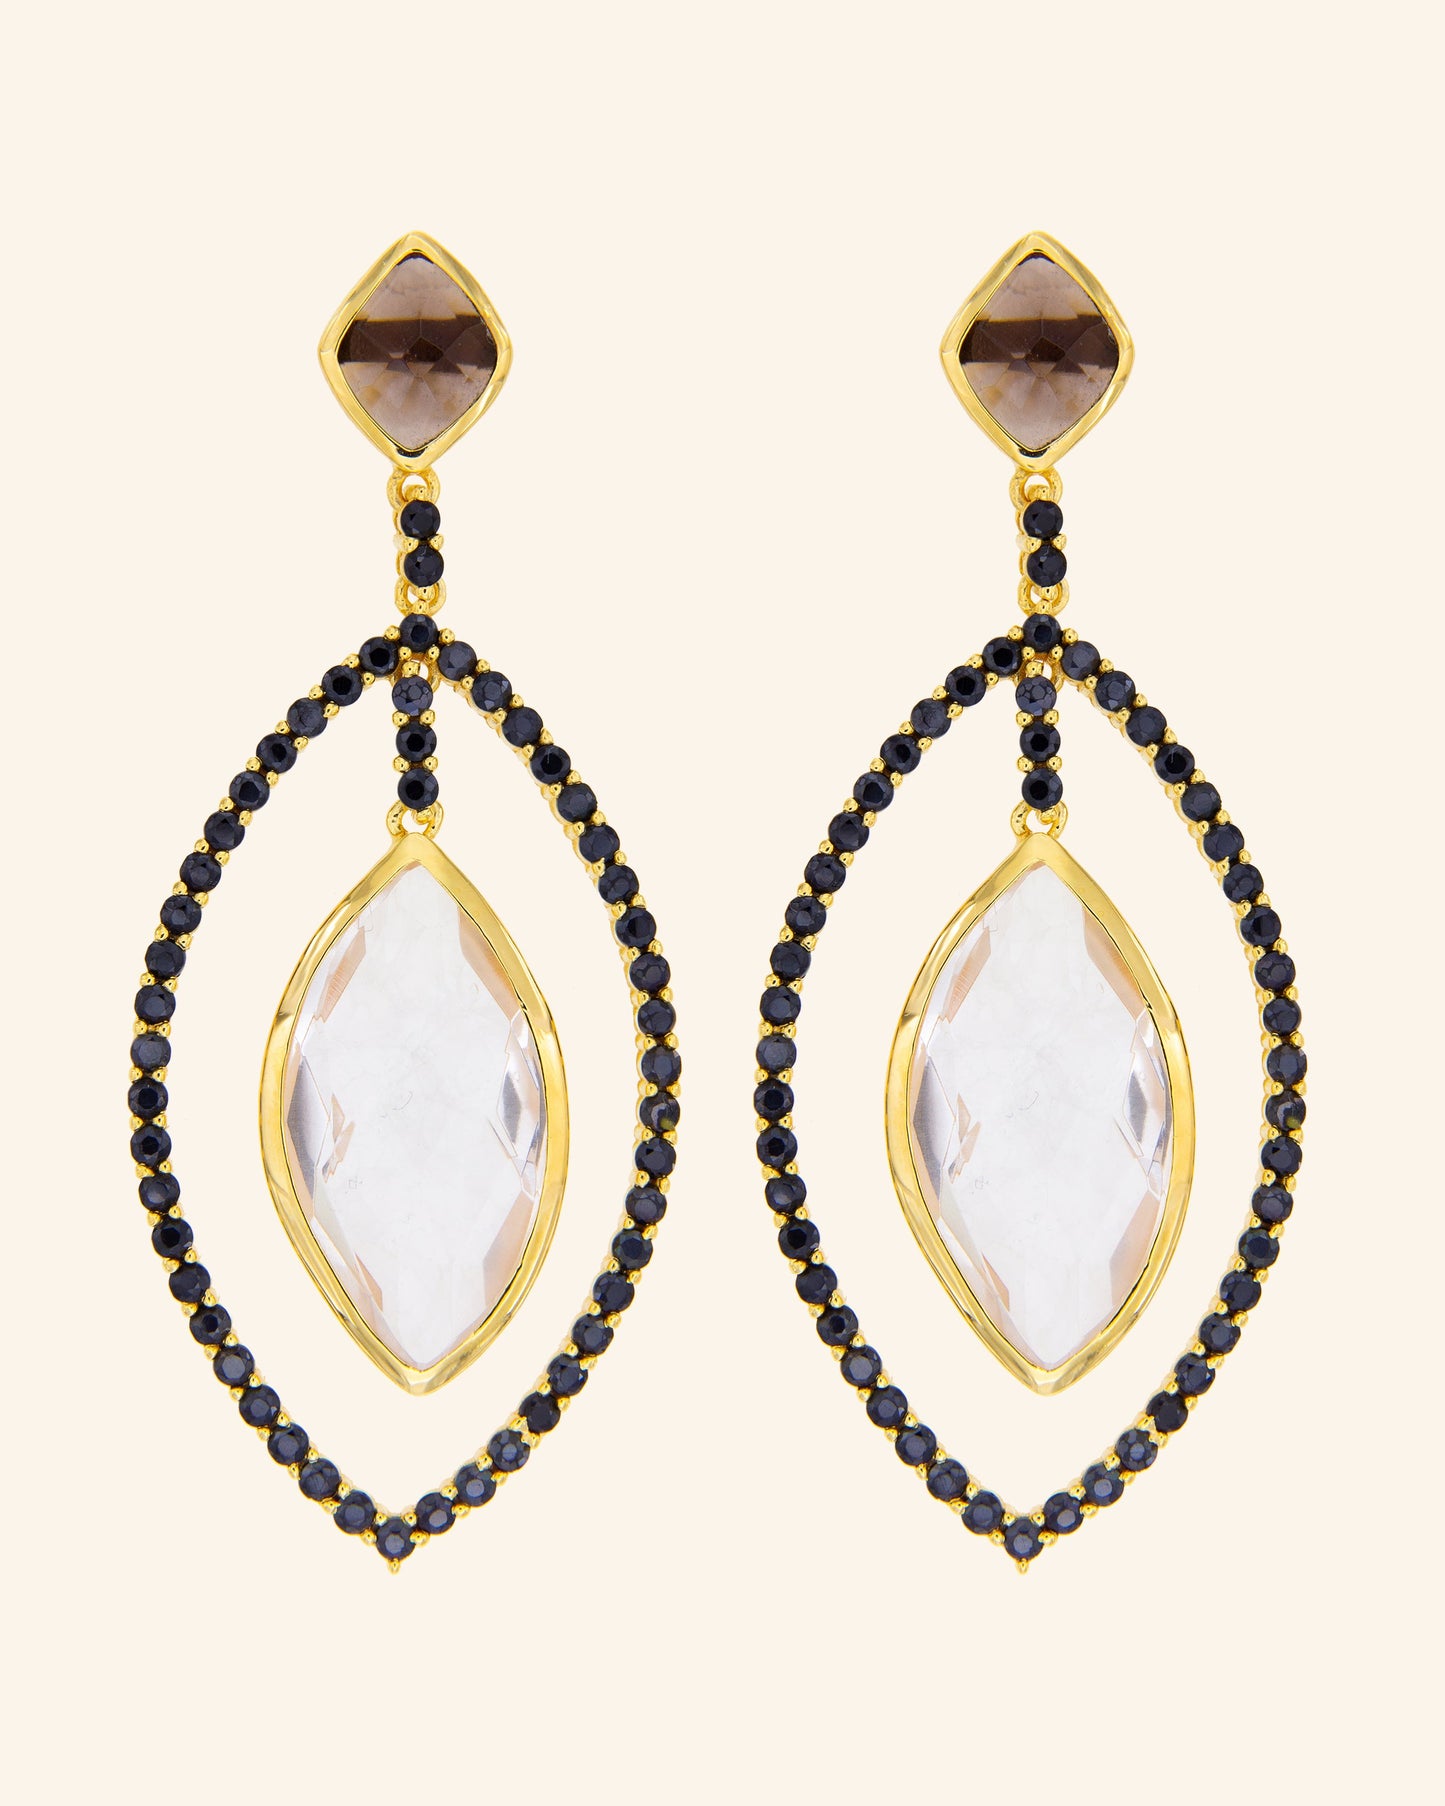 Dome earrings with smoked quartz, colorless quartz and zircons